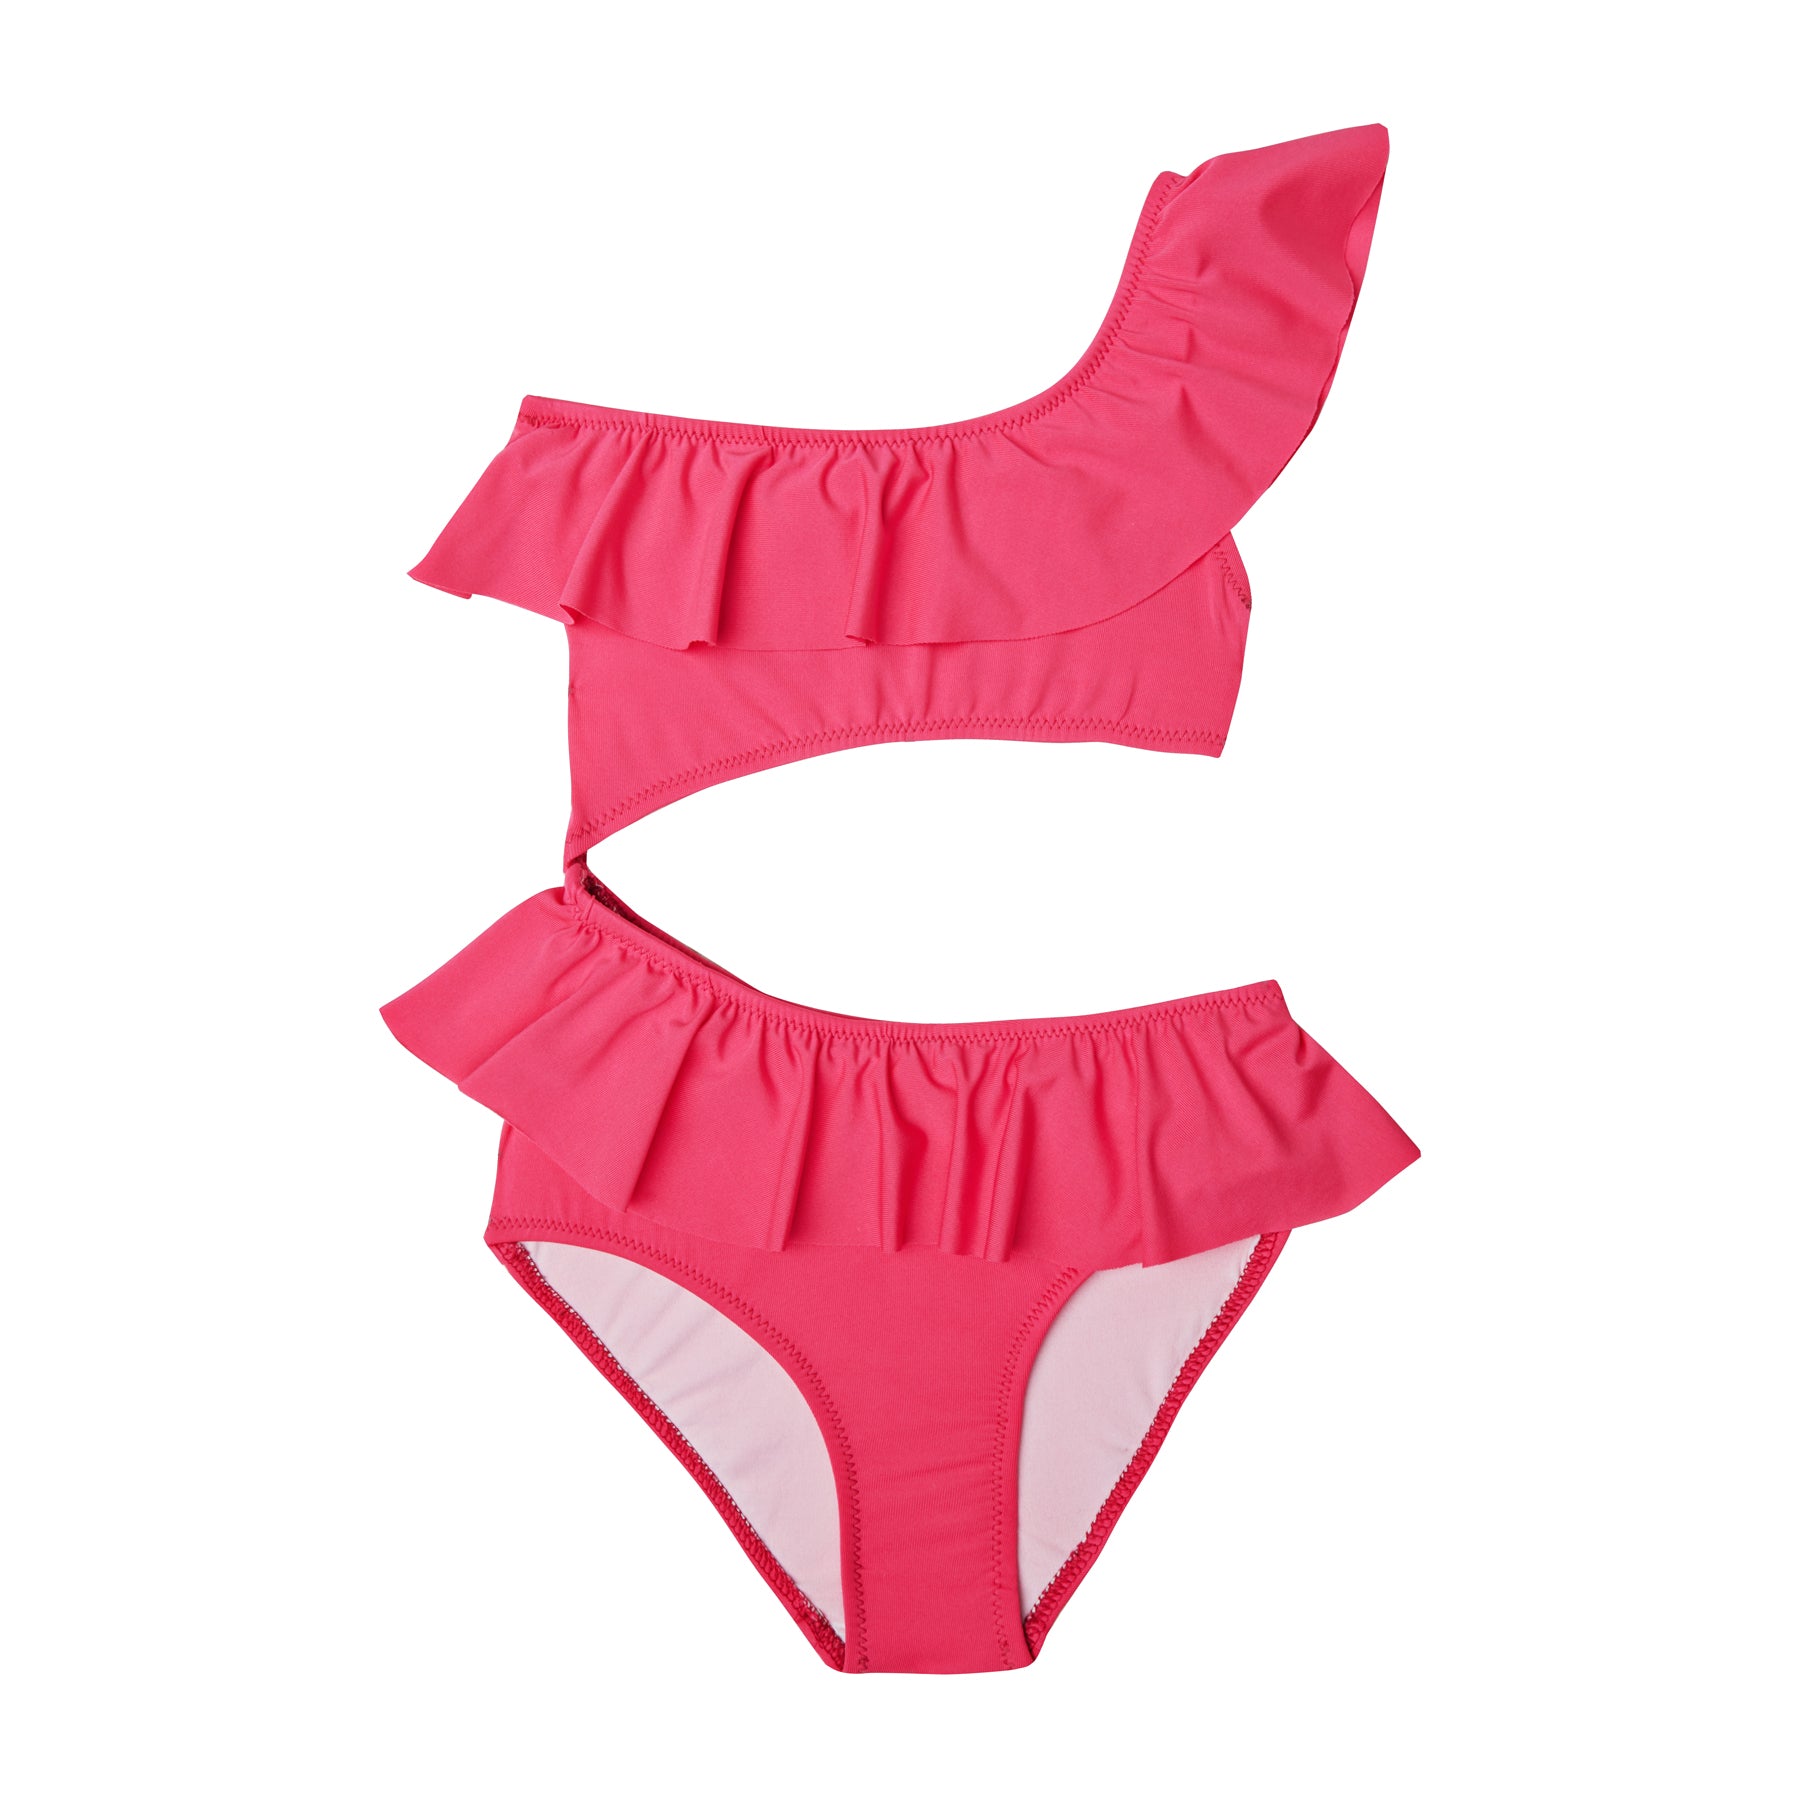 GIRL’S ONE PIECE CUT OUT LIBELLULA (PINK)